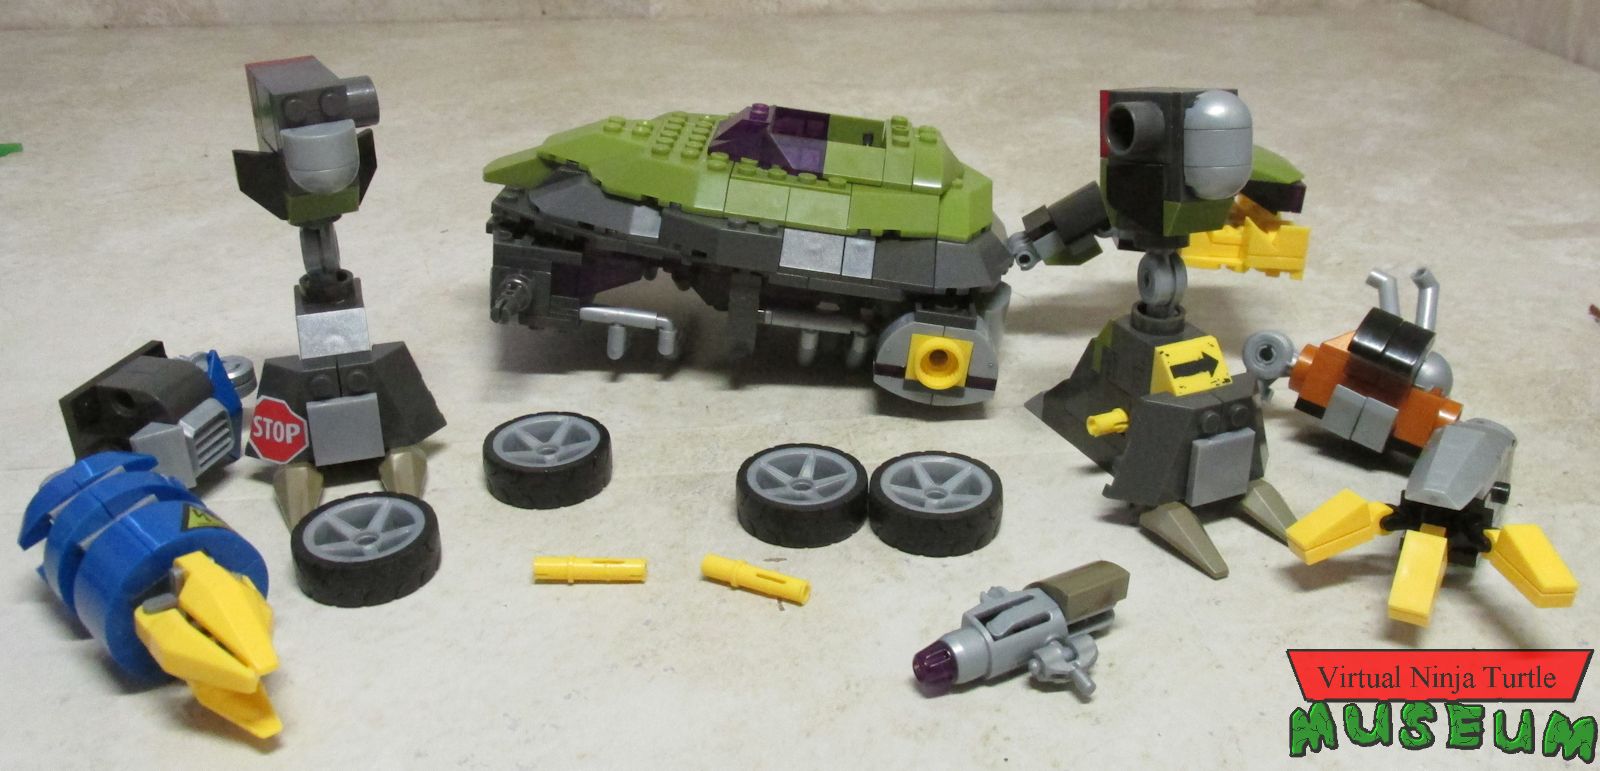 Turtle Mech disassembled